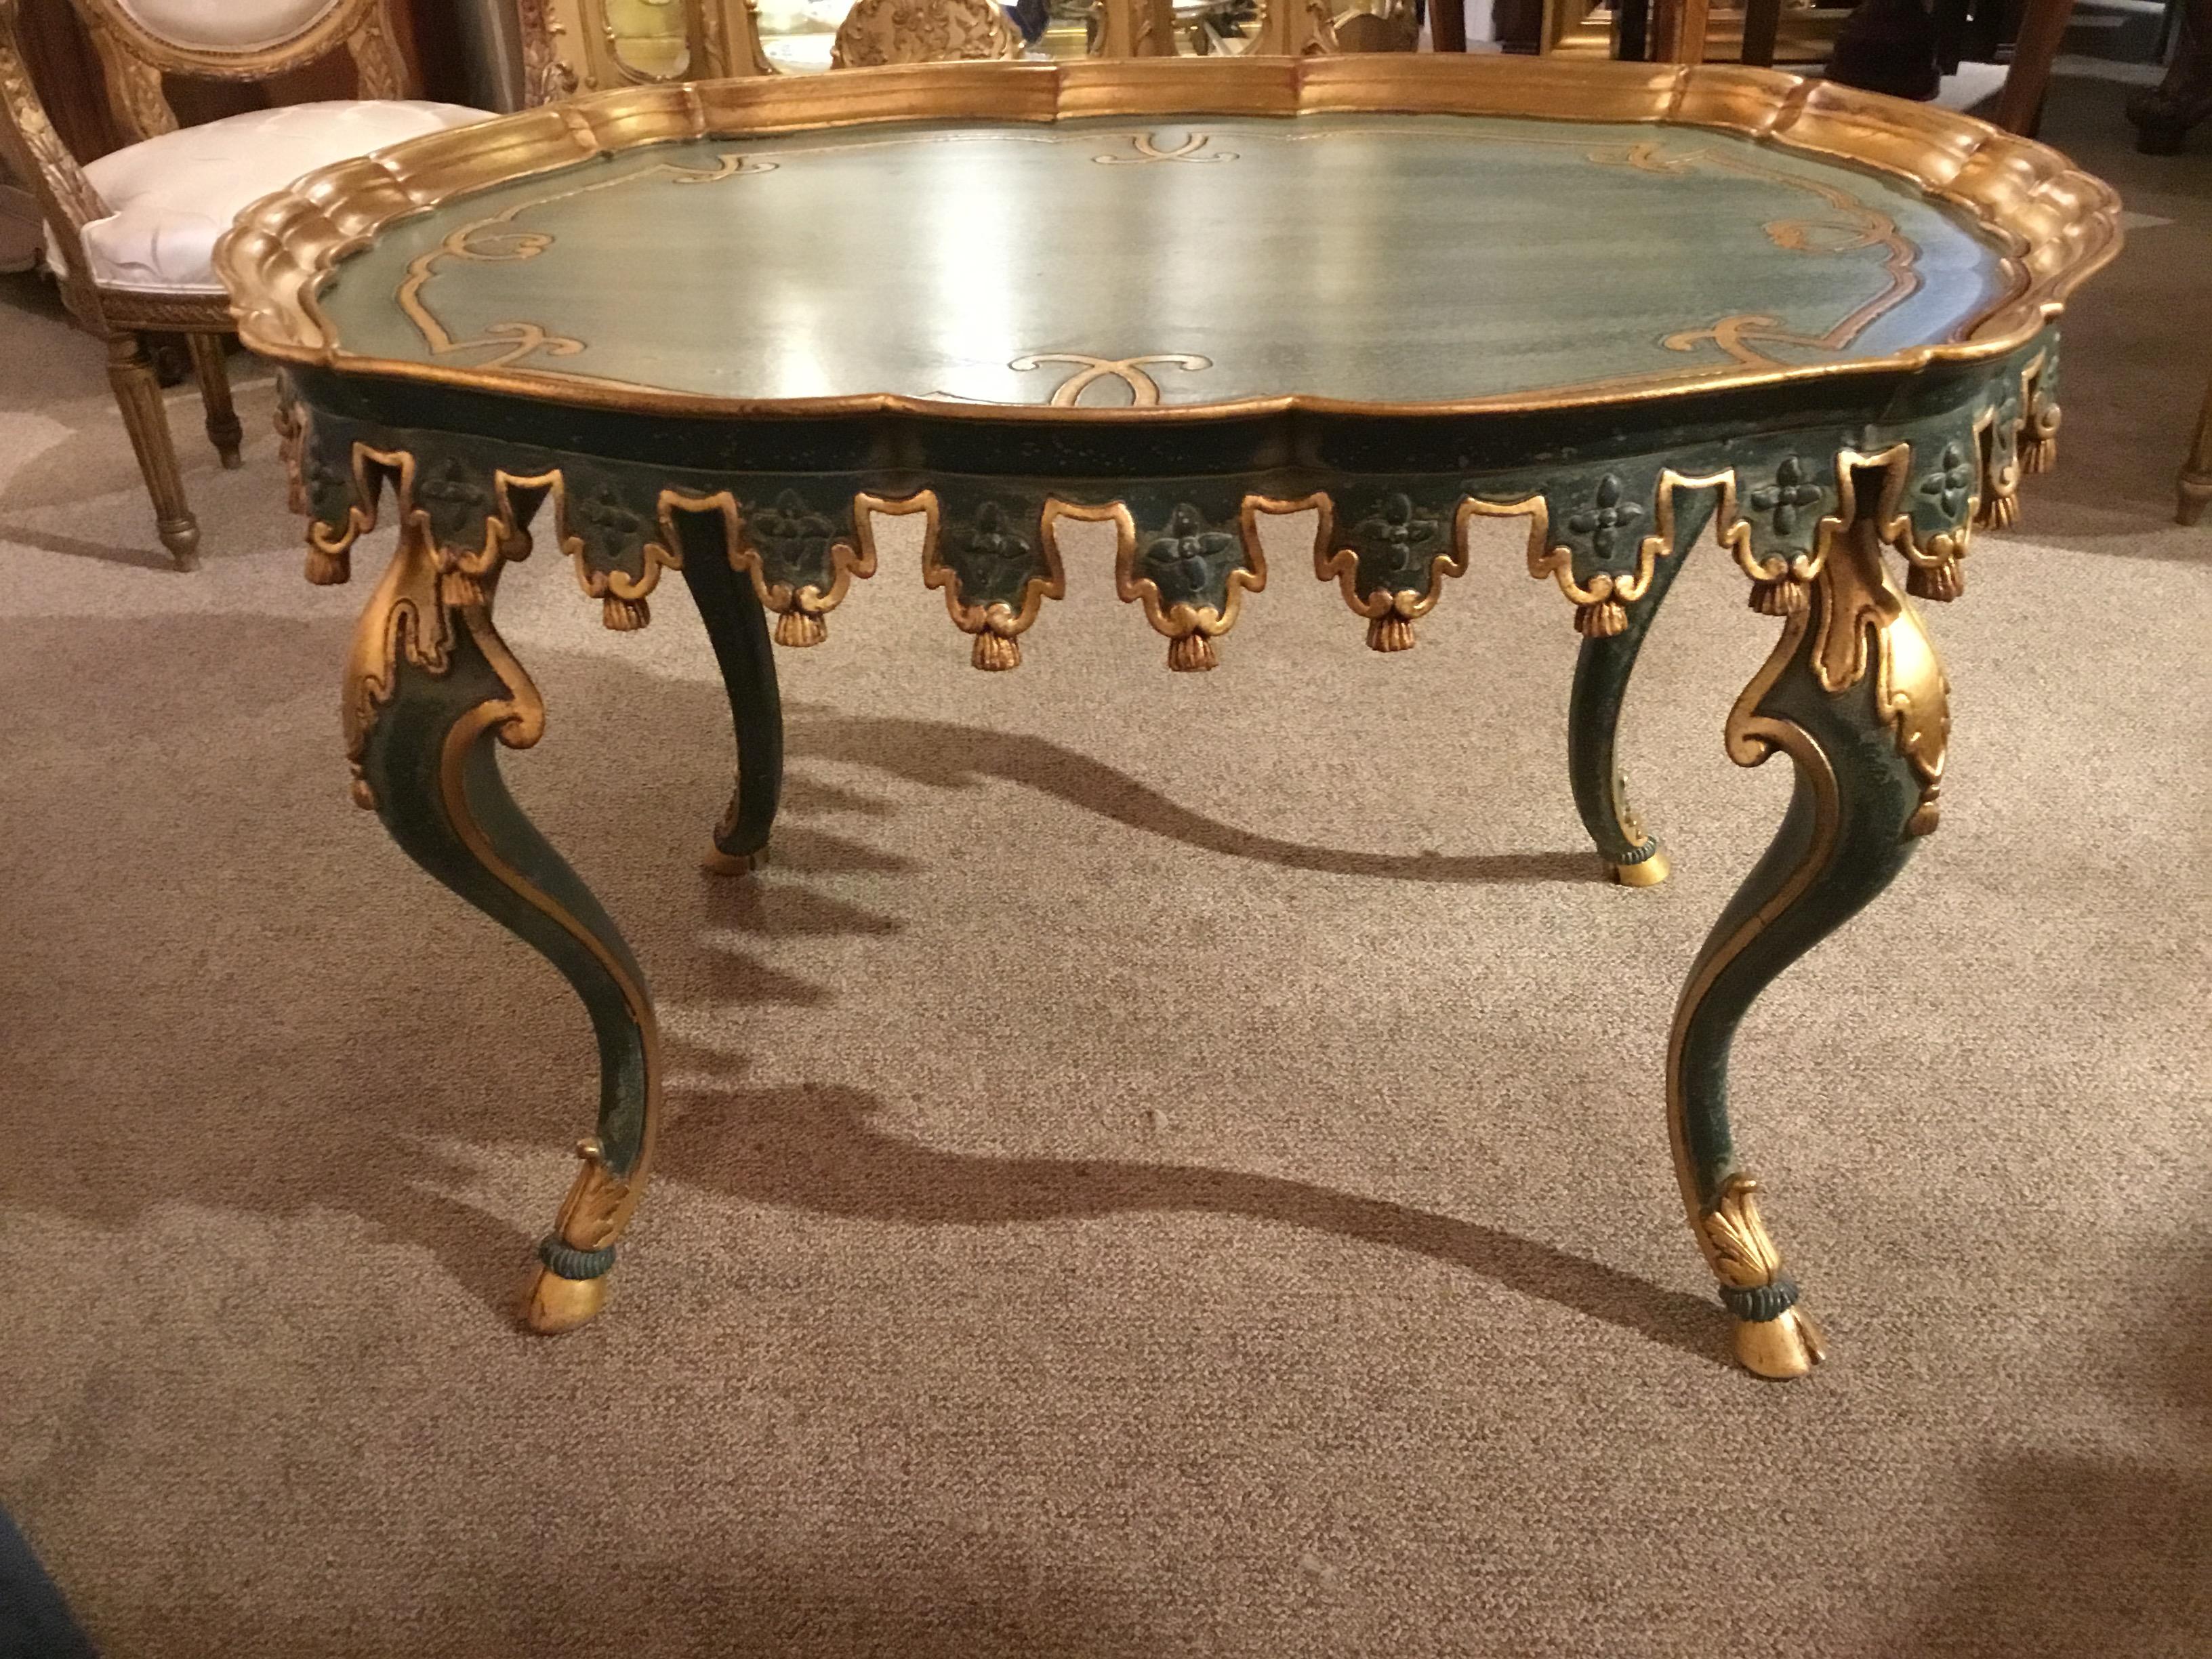 20th Century Coffee or Cocktail Table, Italian, Oval Painted with Gold Gilt Trim